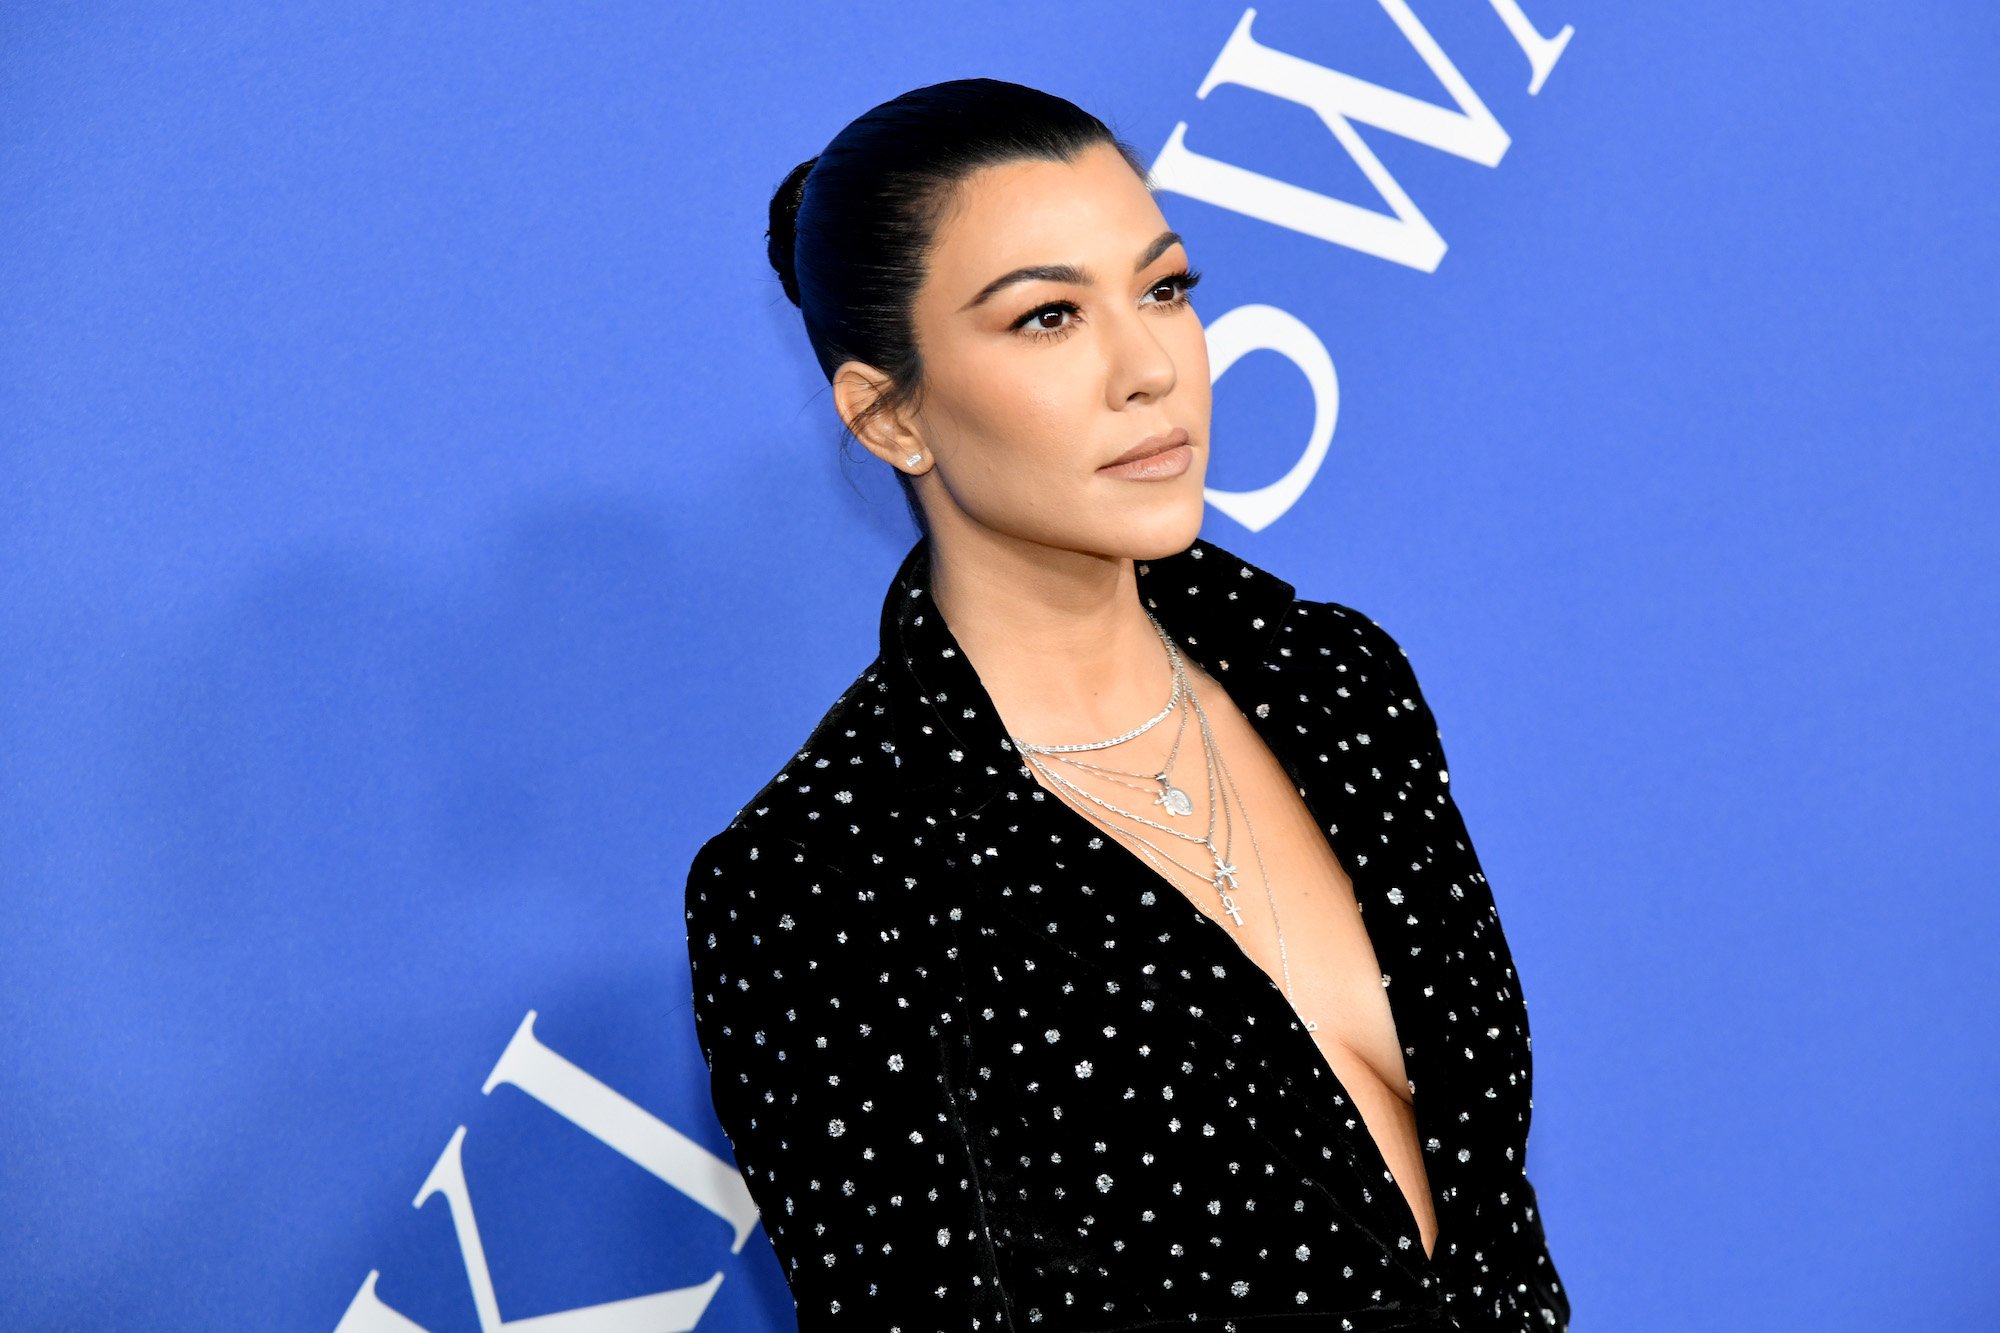 Kourtney Kardashian wearing a black blazer in front of a blue background, looking away from the camera